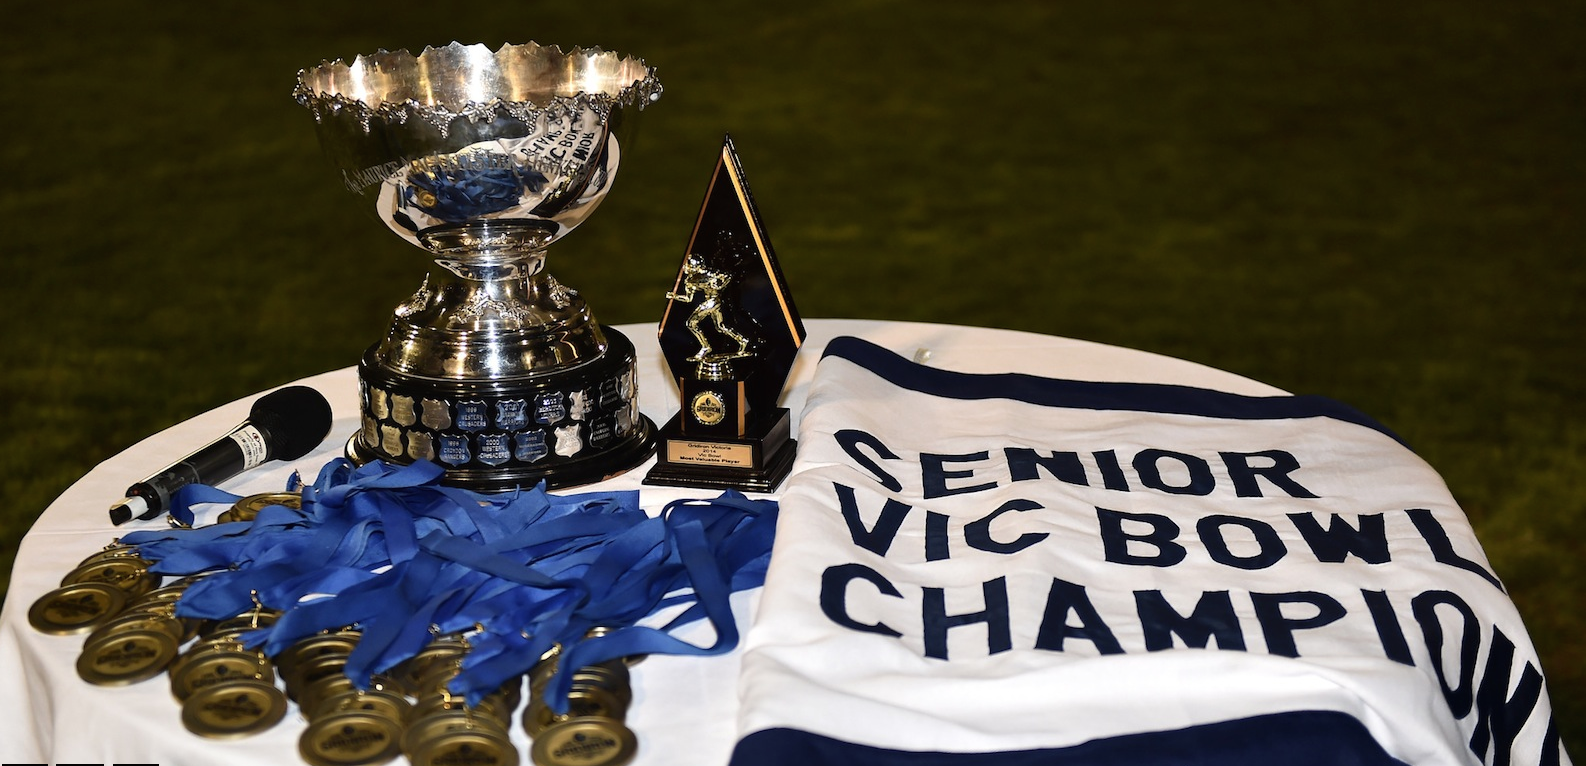 Vic Bowl, Medallions and Penant awaiting their Champions (Photo courtesy of barendphotos.com)